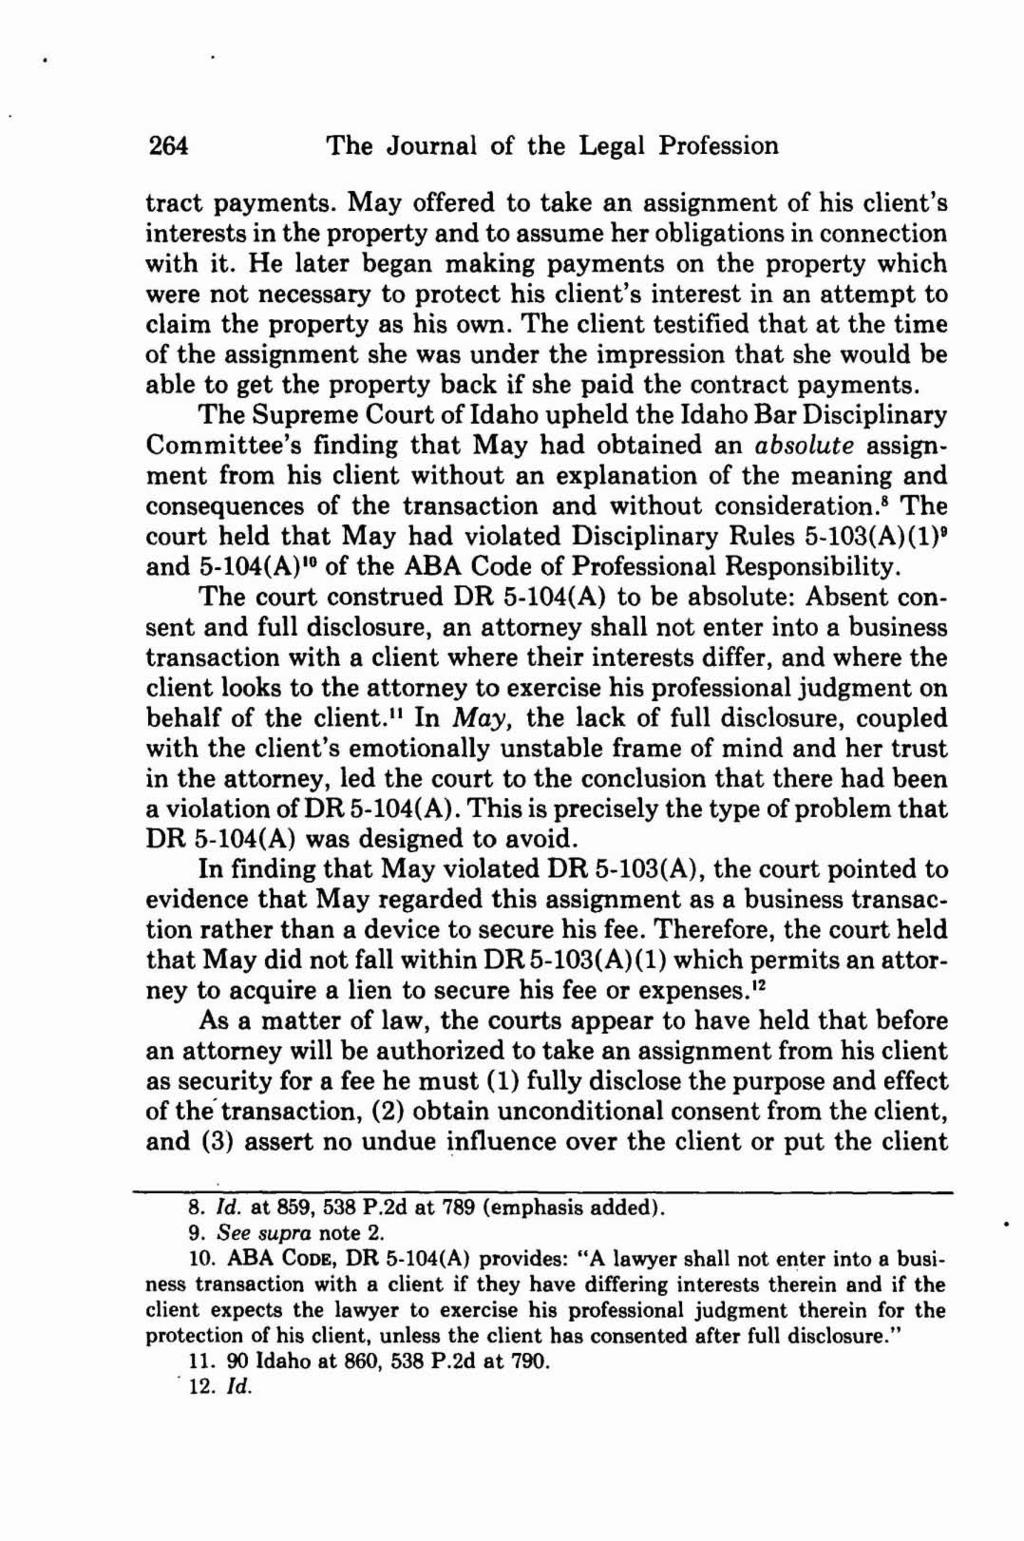 264 The Journal of the Legal Profession tract payments. May offered to take an assignment of his client's interests in the property and to assume her obligations in connection with it.